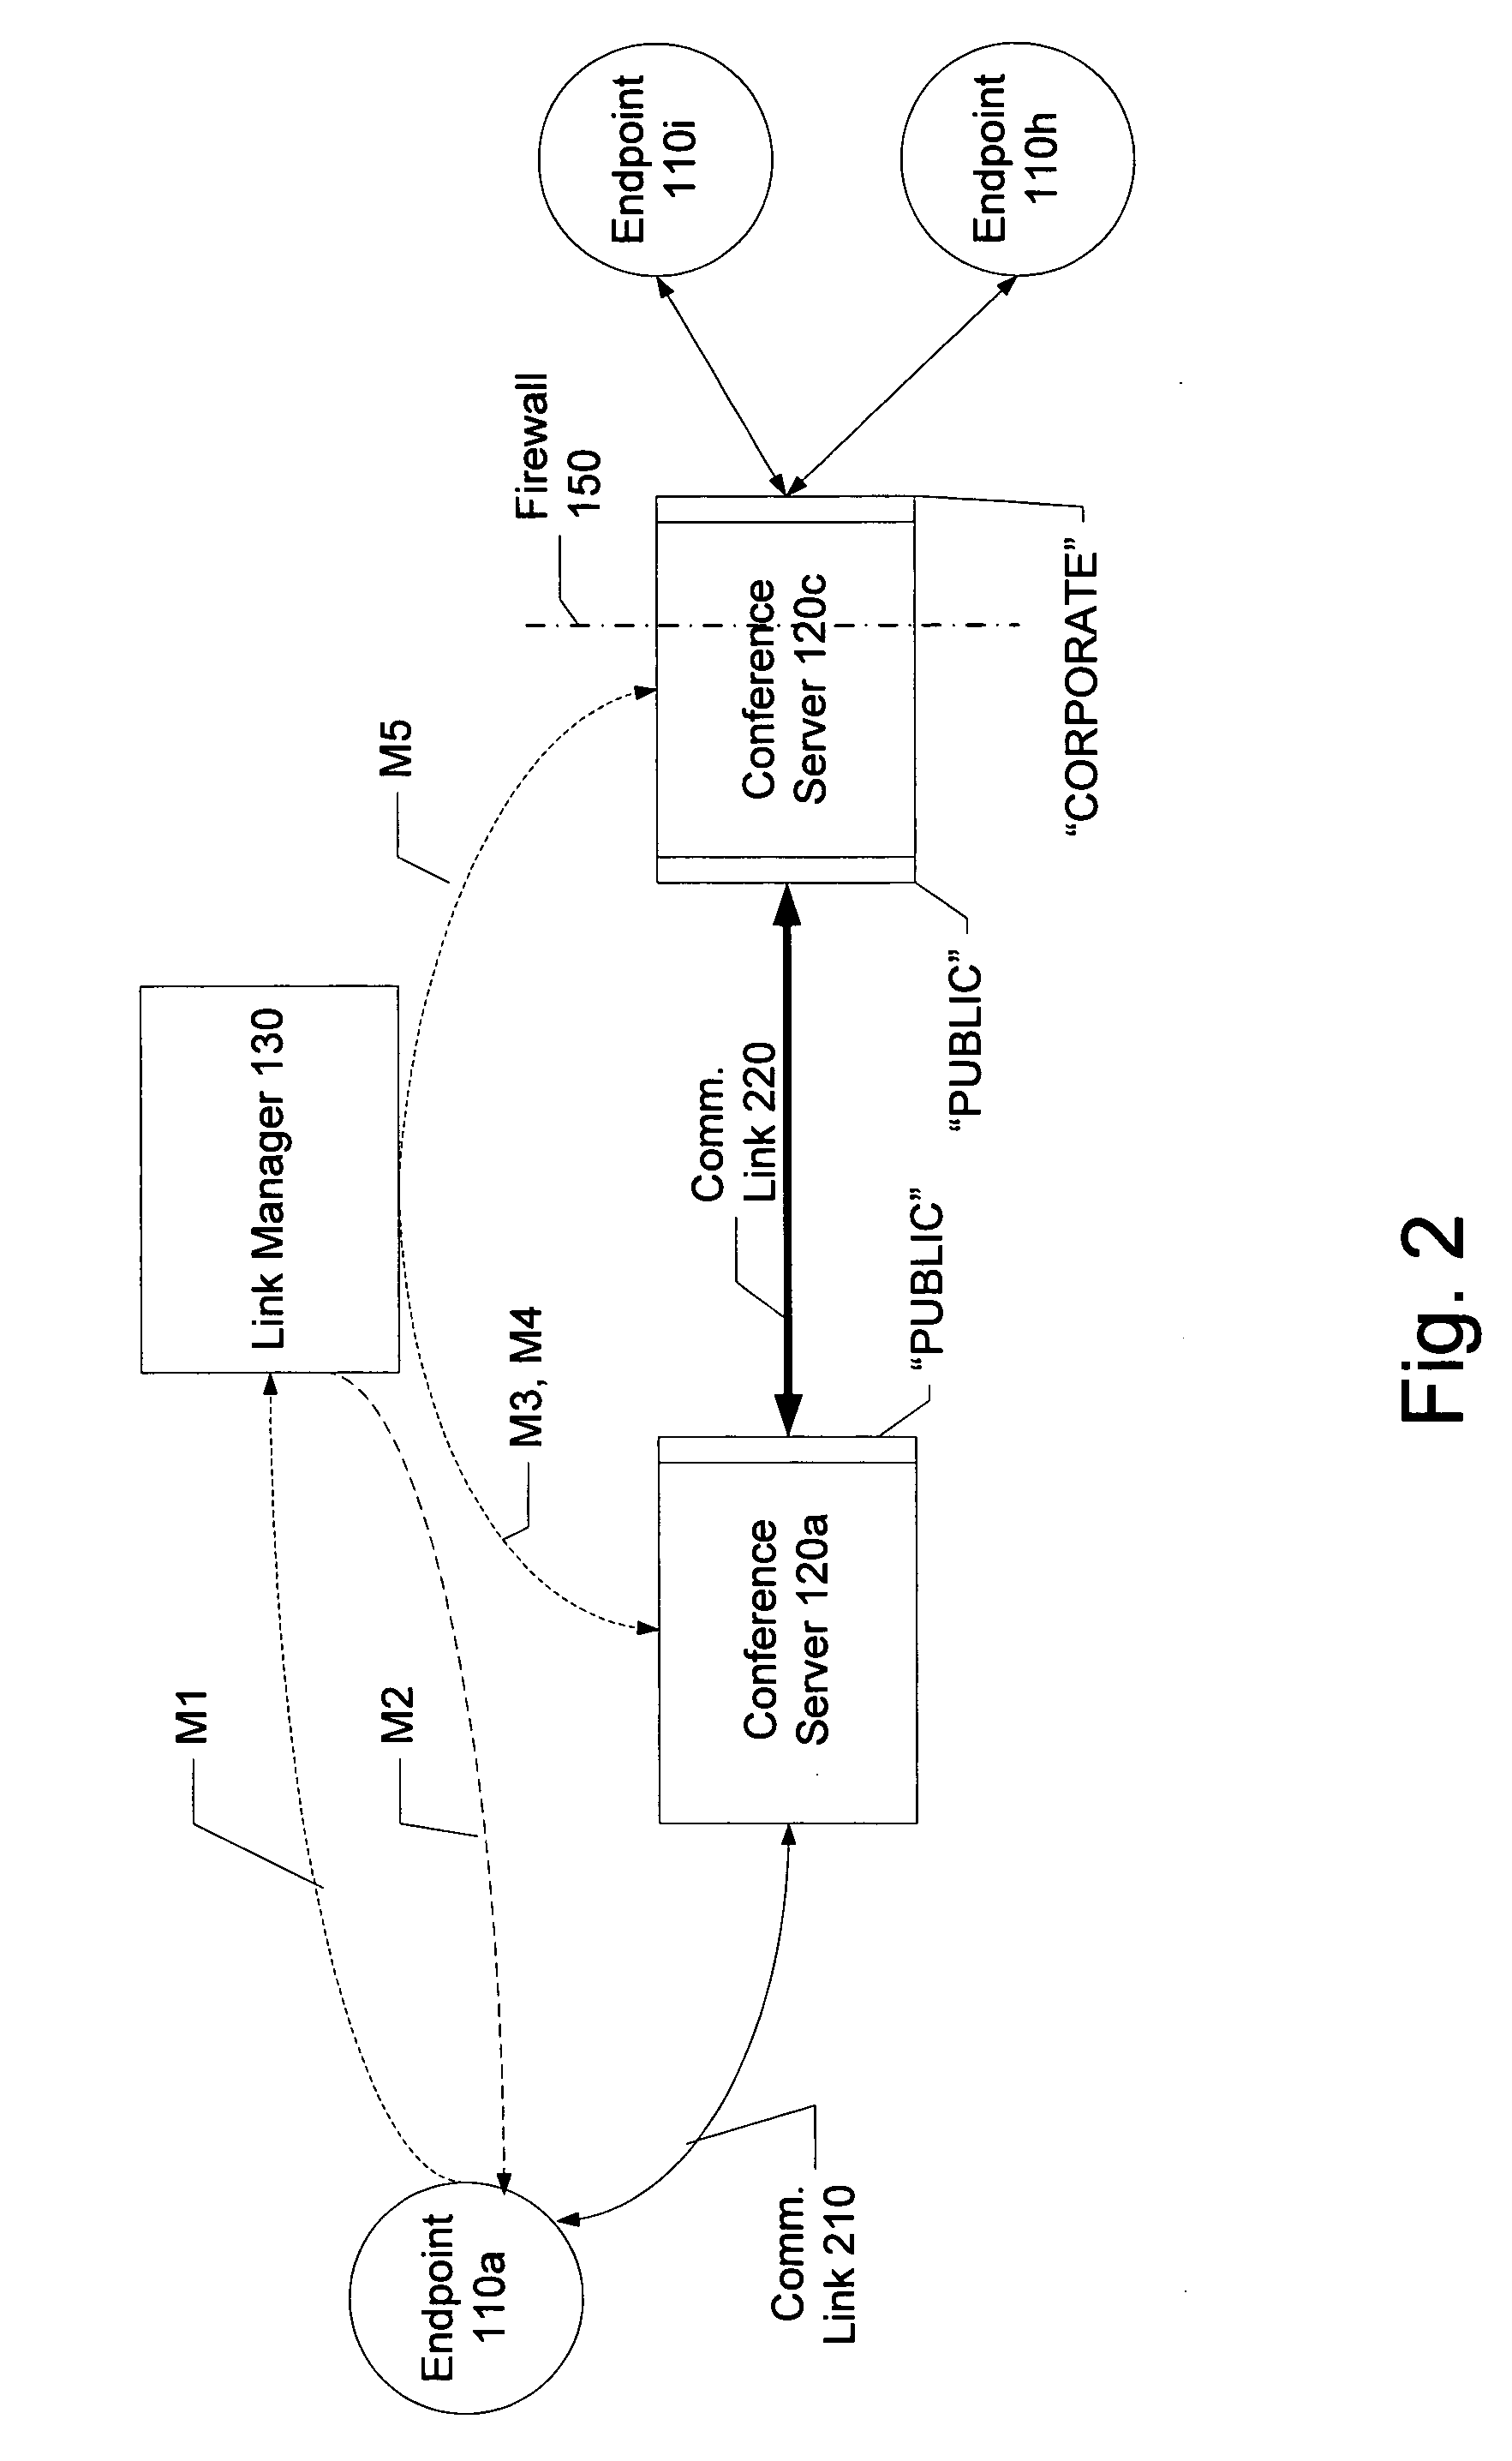 Distributed multipoint conferencing with automatic endpoint address detection and dynamic endpoint-server allocation